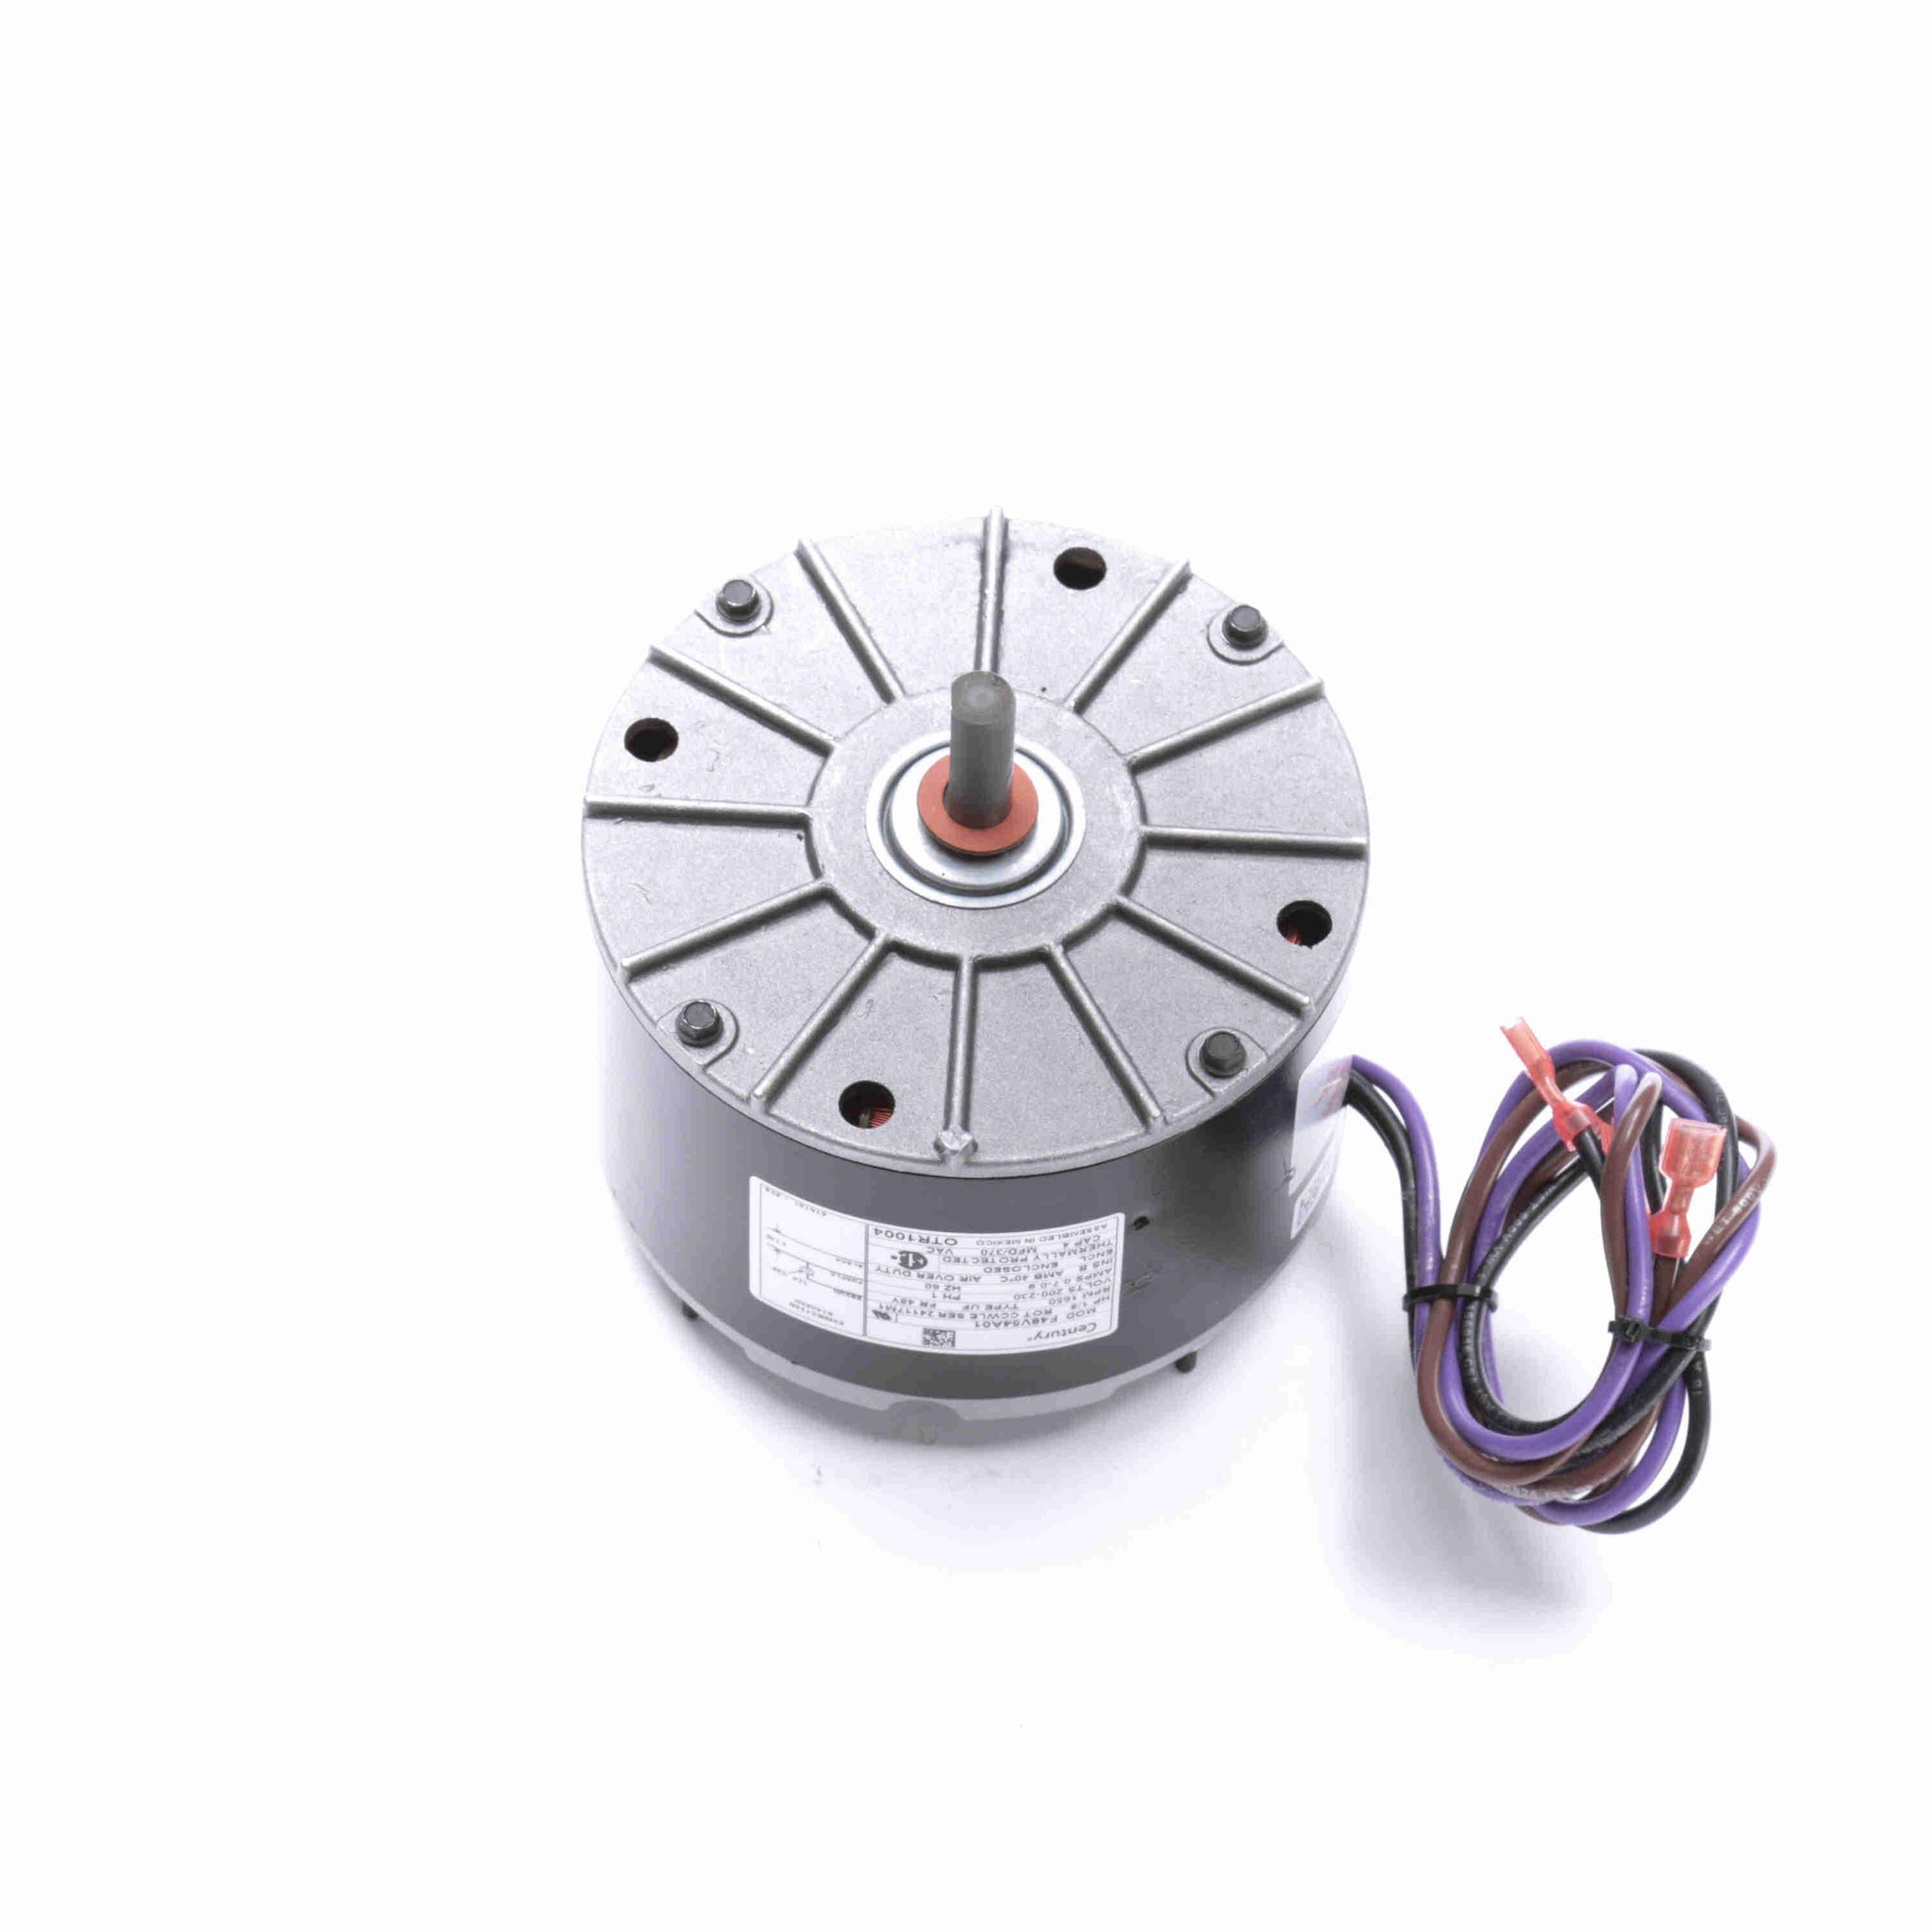 OTR1004 - 1/8 HP OEM Replacement Motor, 1650 RPM, 200-230 Volts, 48 Frame, TEAO - Hardware & Moreee